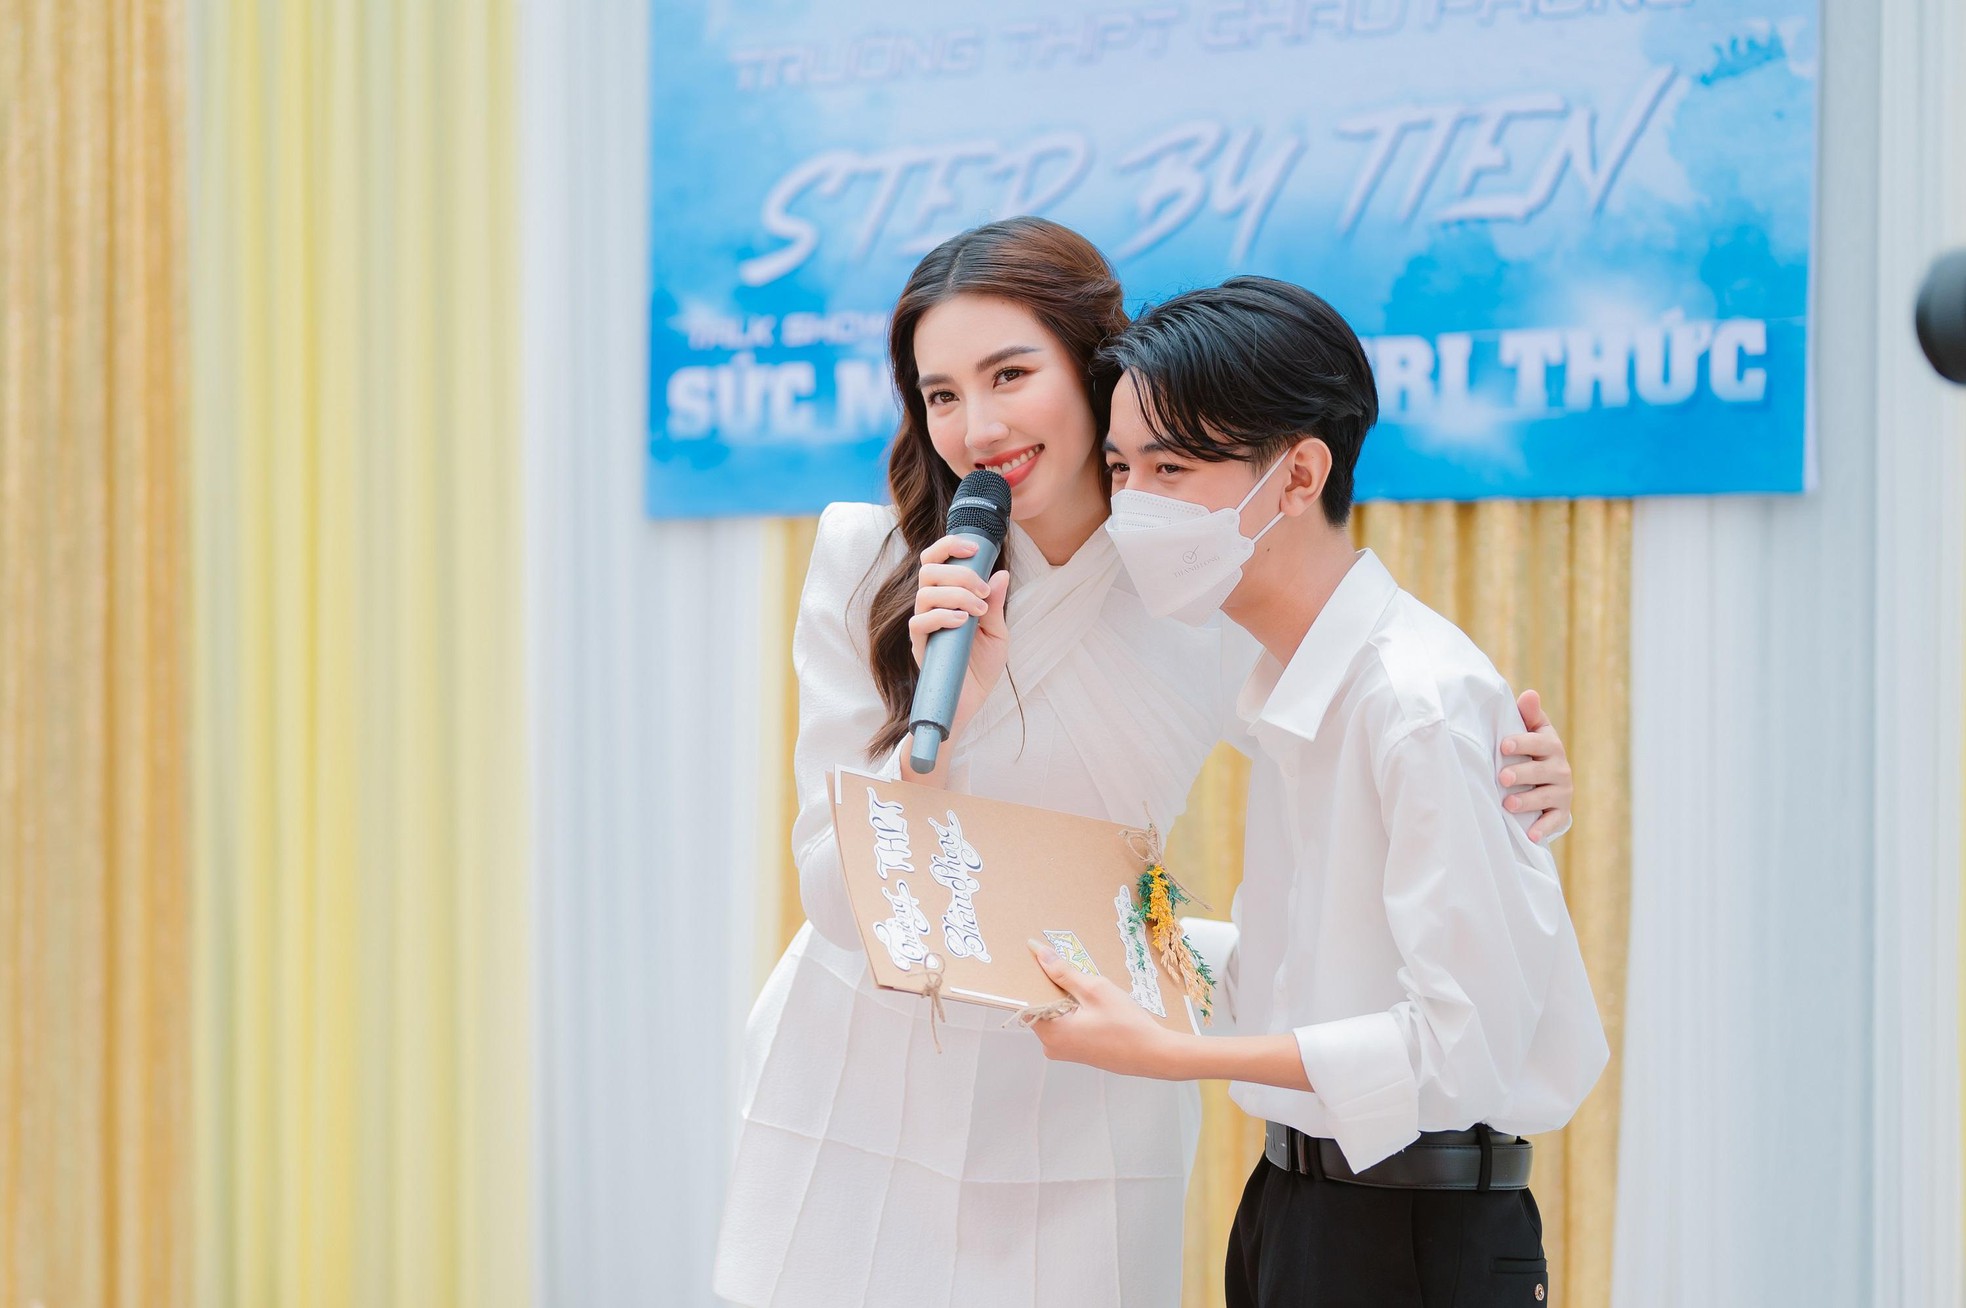 Thuy Tien was surrounded by fans, and was given salted egg sponge cake by fans when she gave a speech in An Giang - Photo 7.